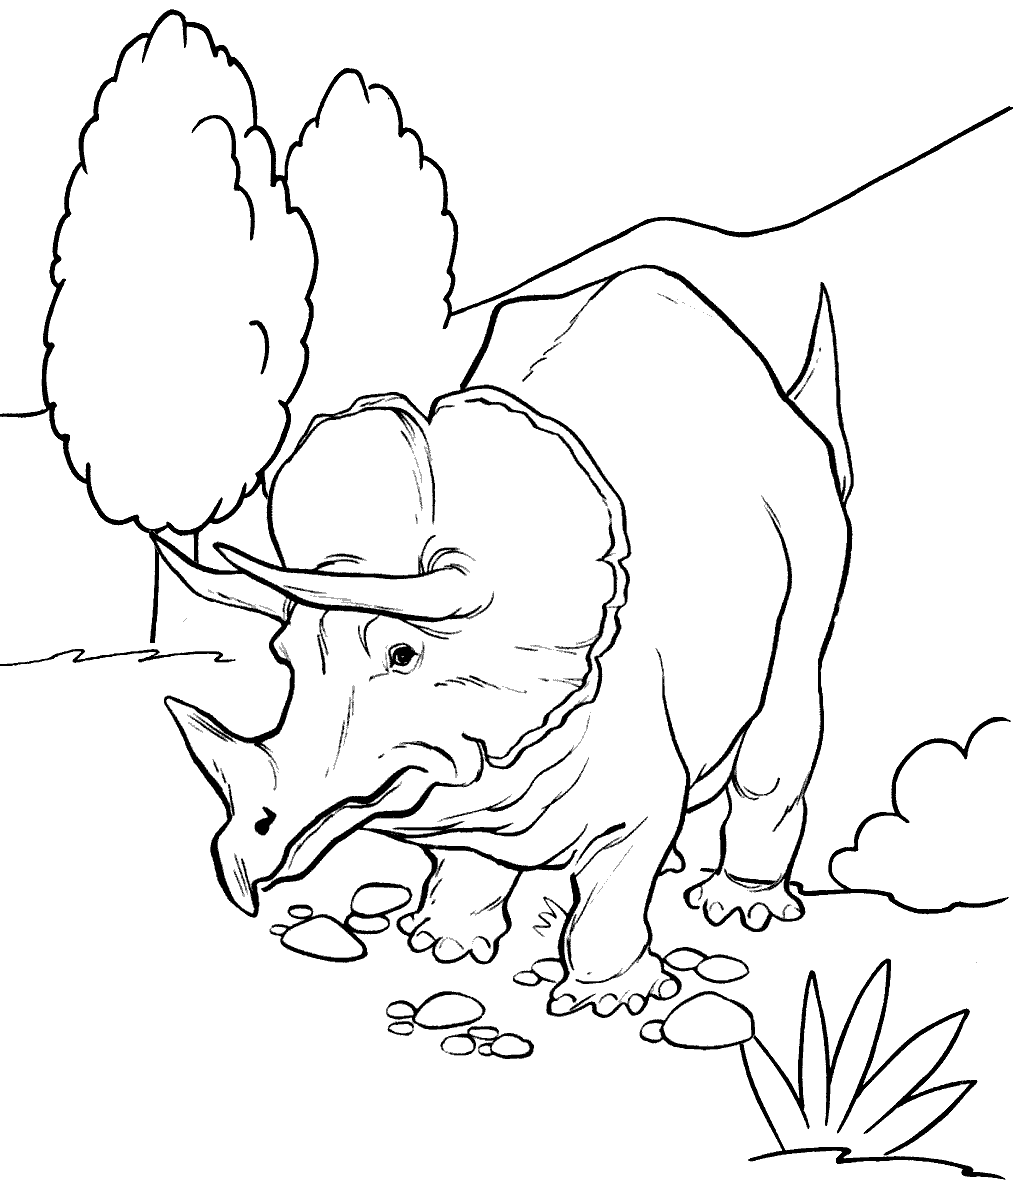 Fun Triceratops Coloring Page Types of Dino